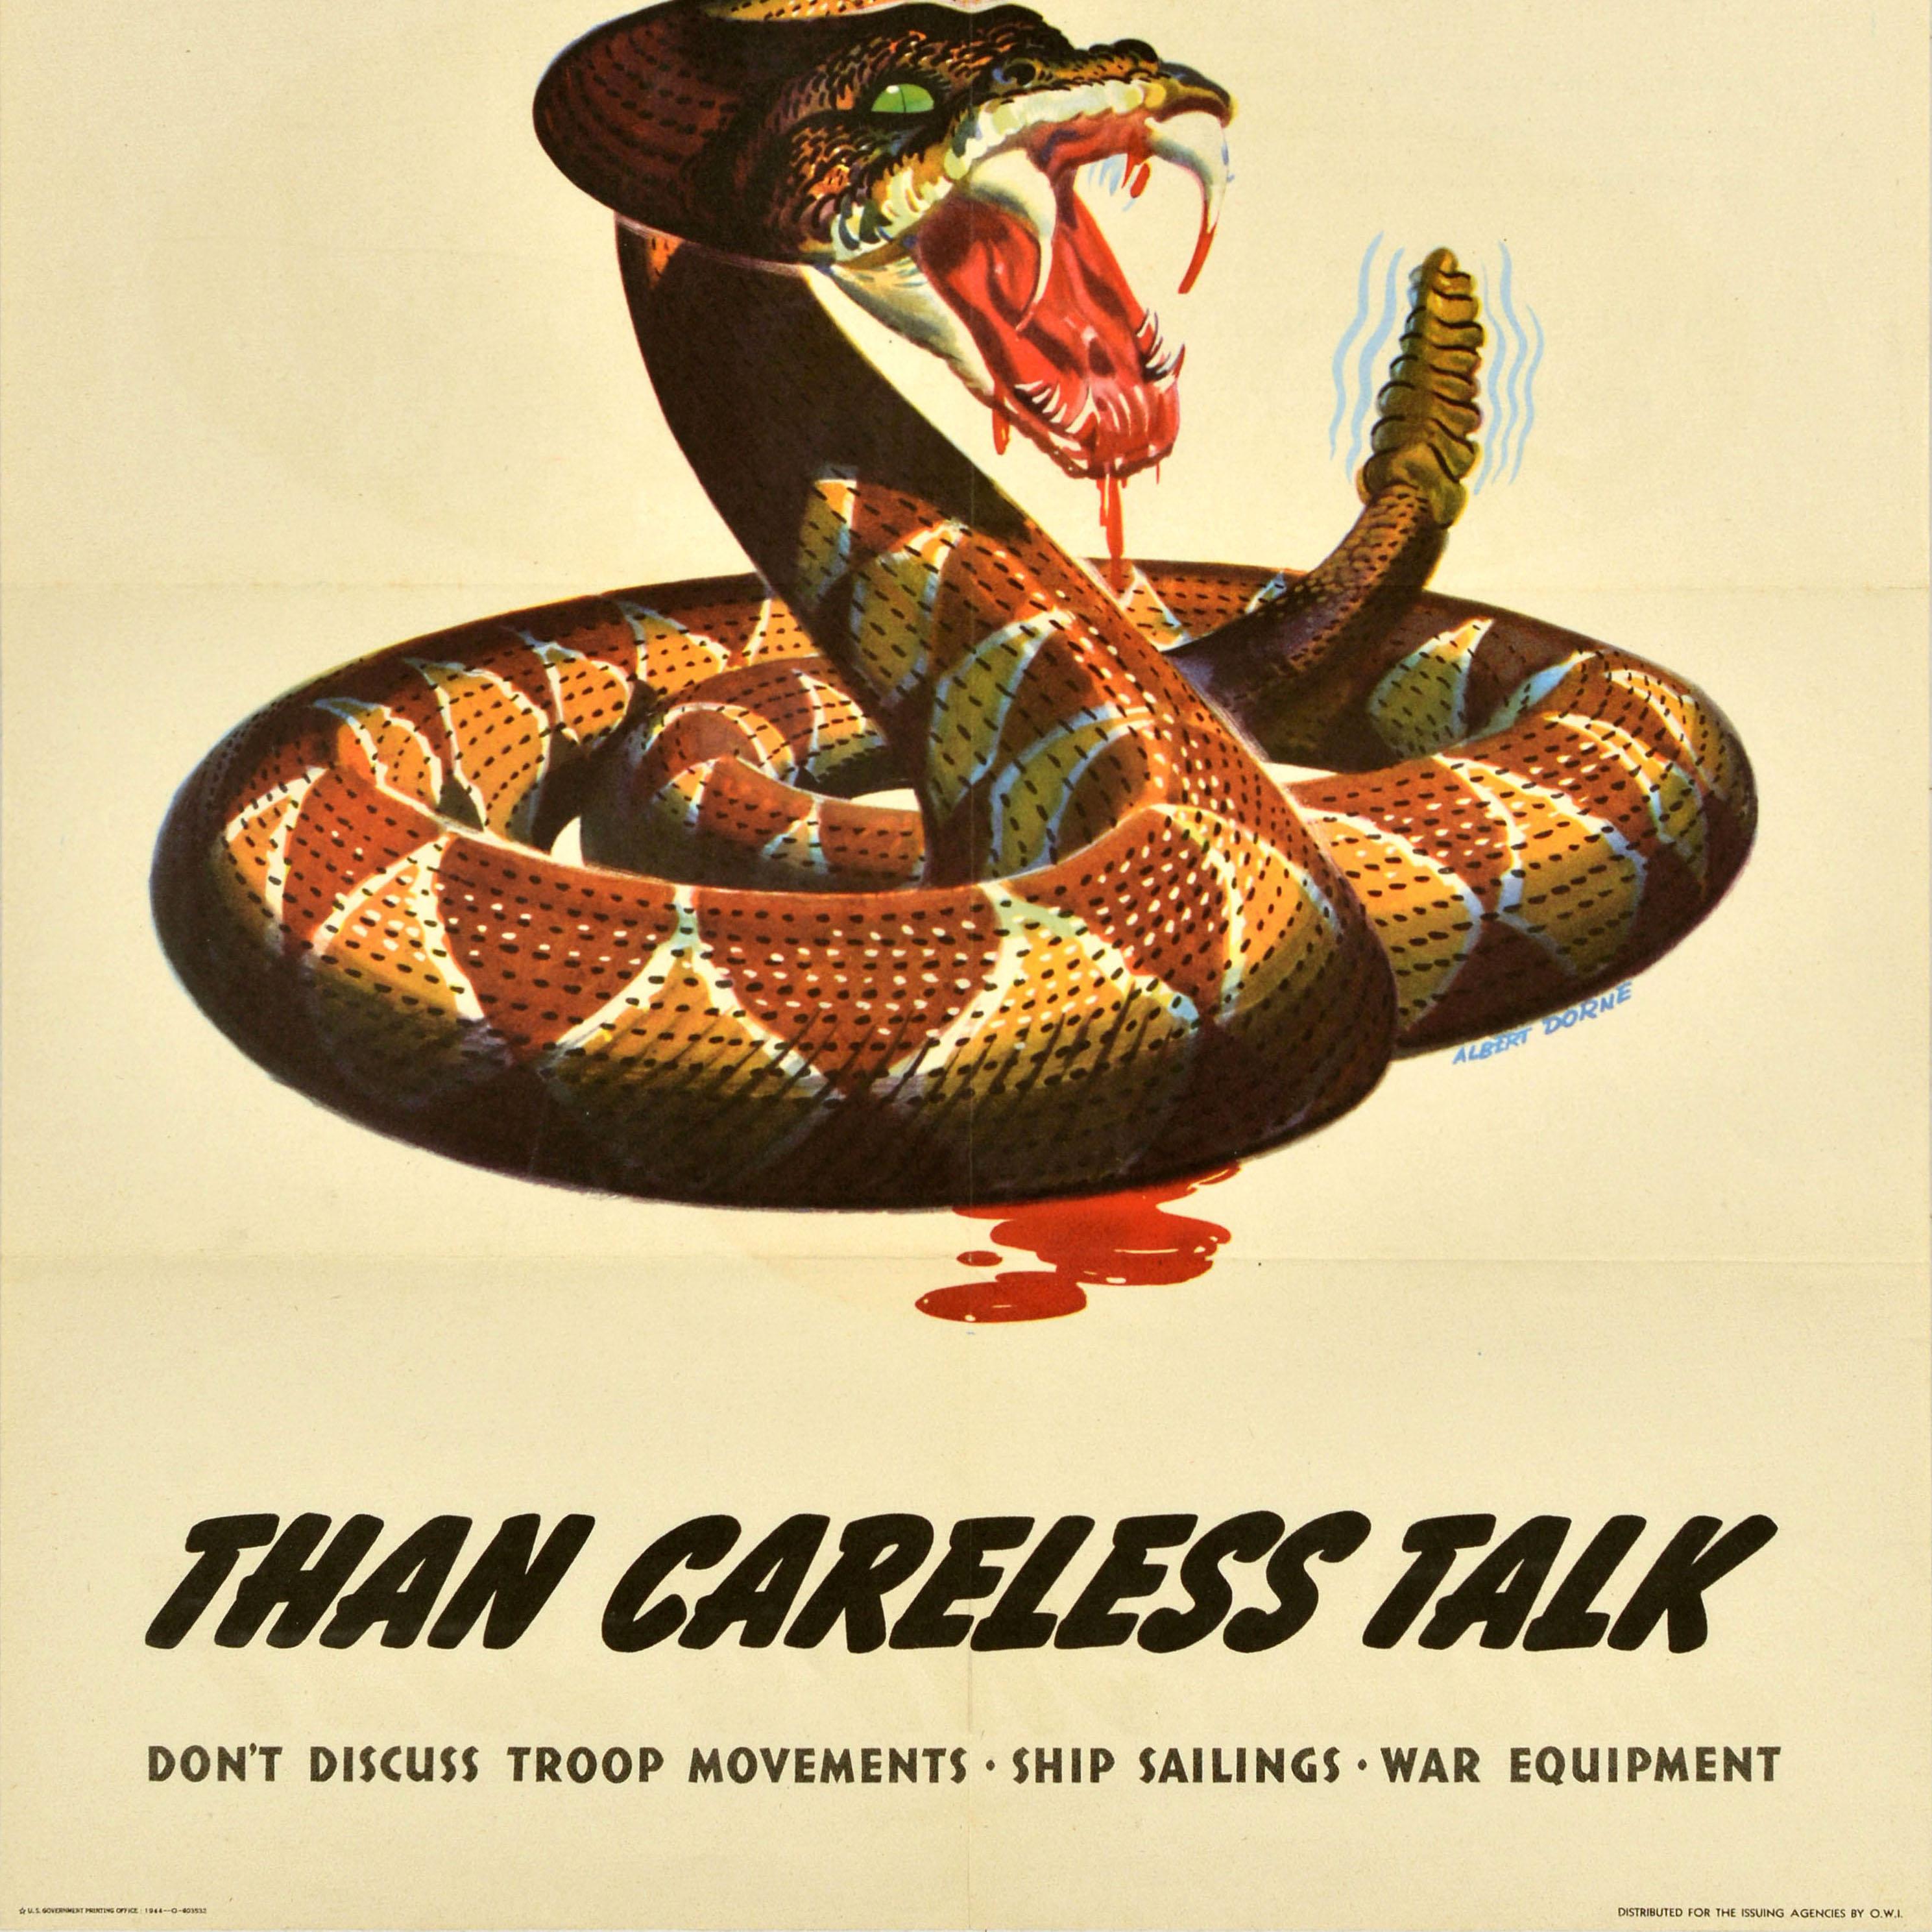 Original vintage World War Two propaganda poster - Less dangerous than careless talk Don't discuss Troop movements Ship sailings War equipment - featuring a great illustration of a rattlesnake with green eyes and blood dripping from the sharp fangs